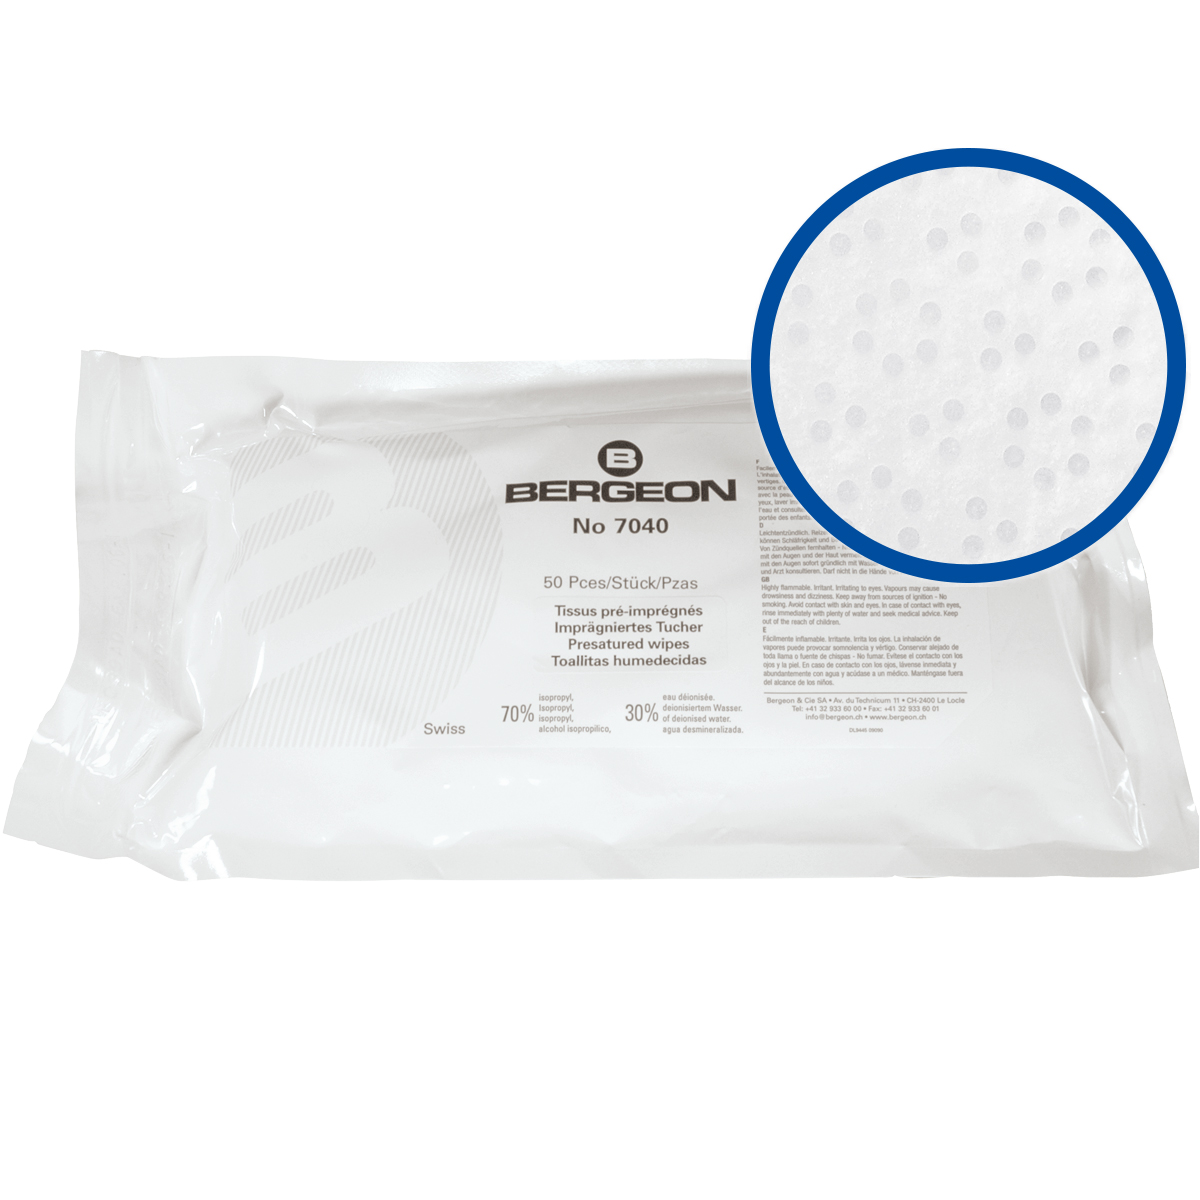 Bergeon cleaning wipes N°7040, polypropylene, for degreasing